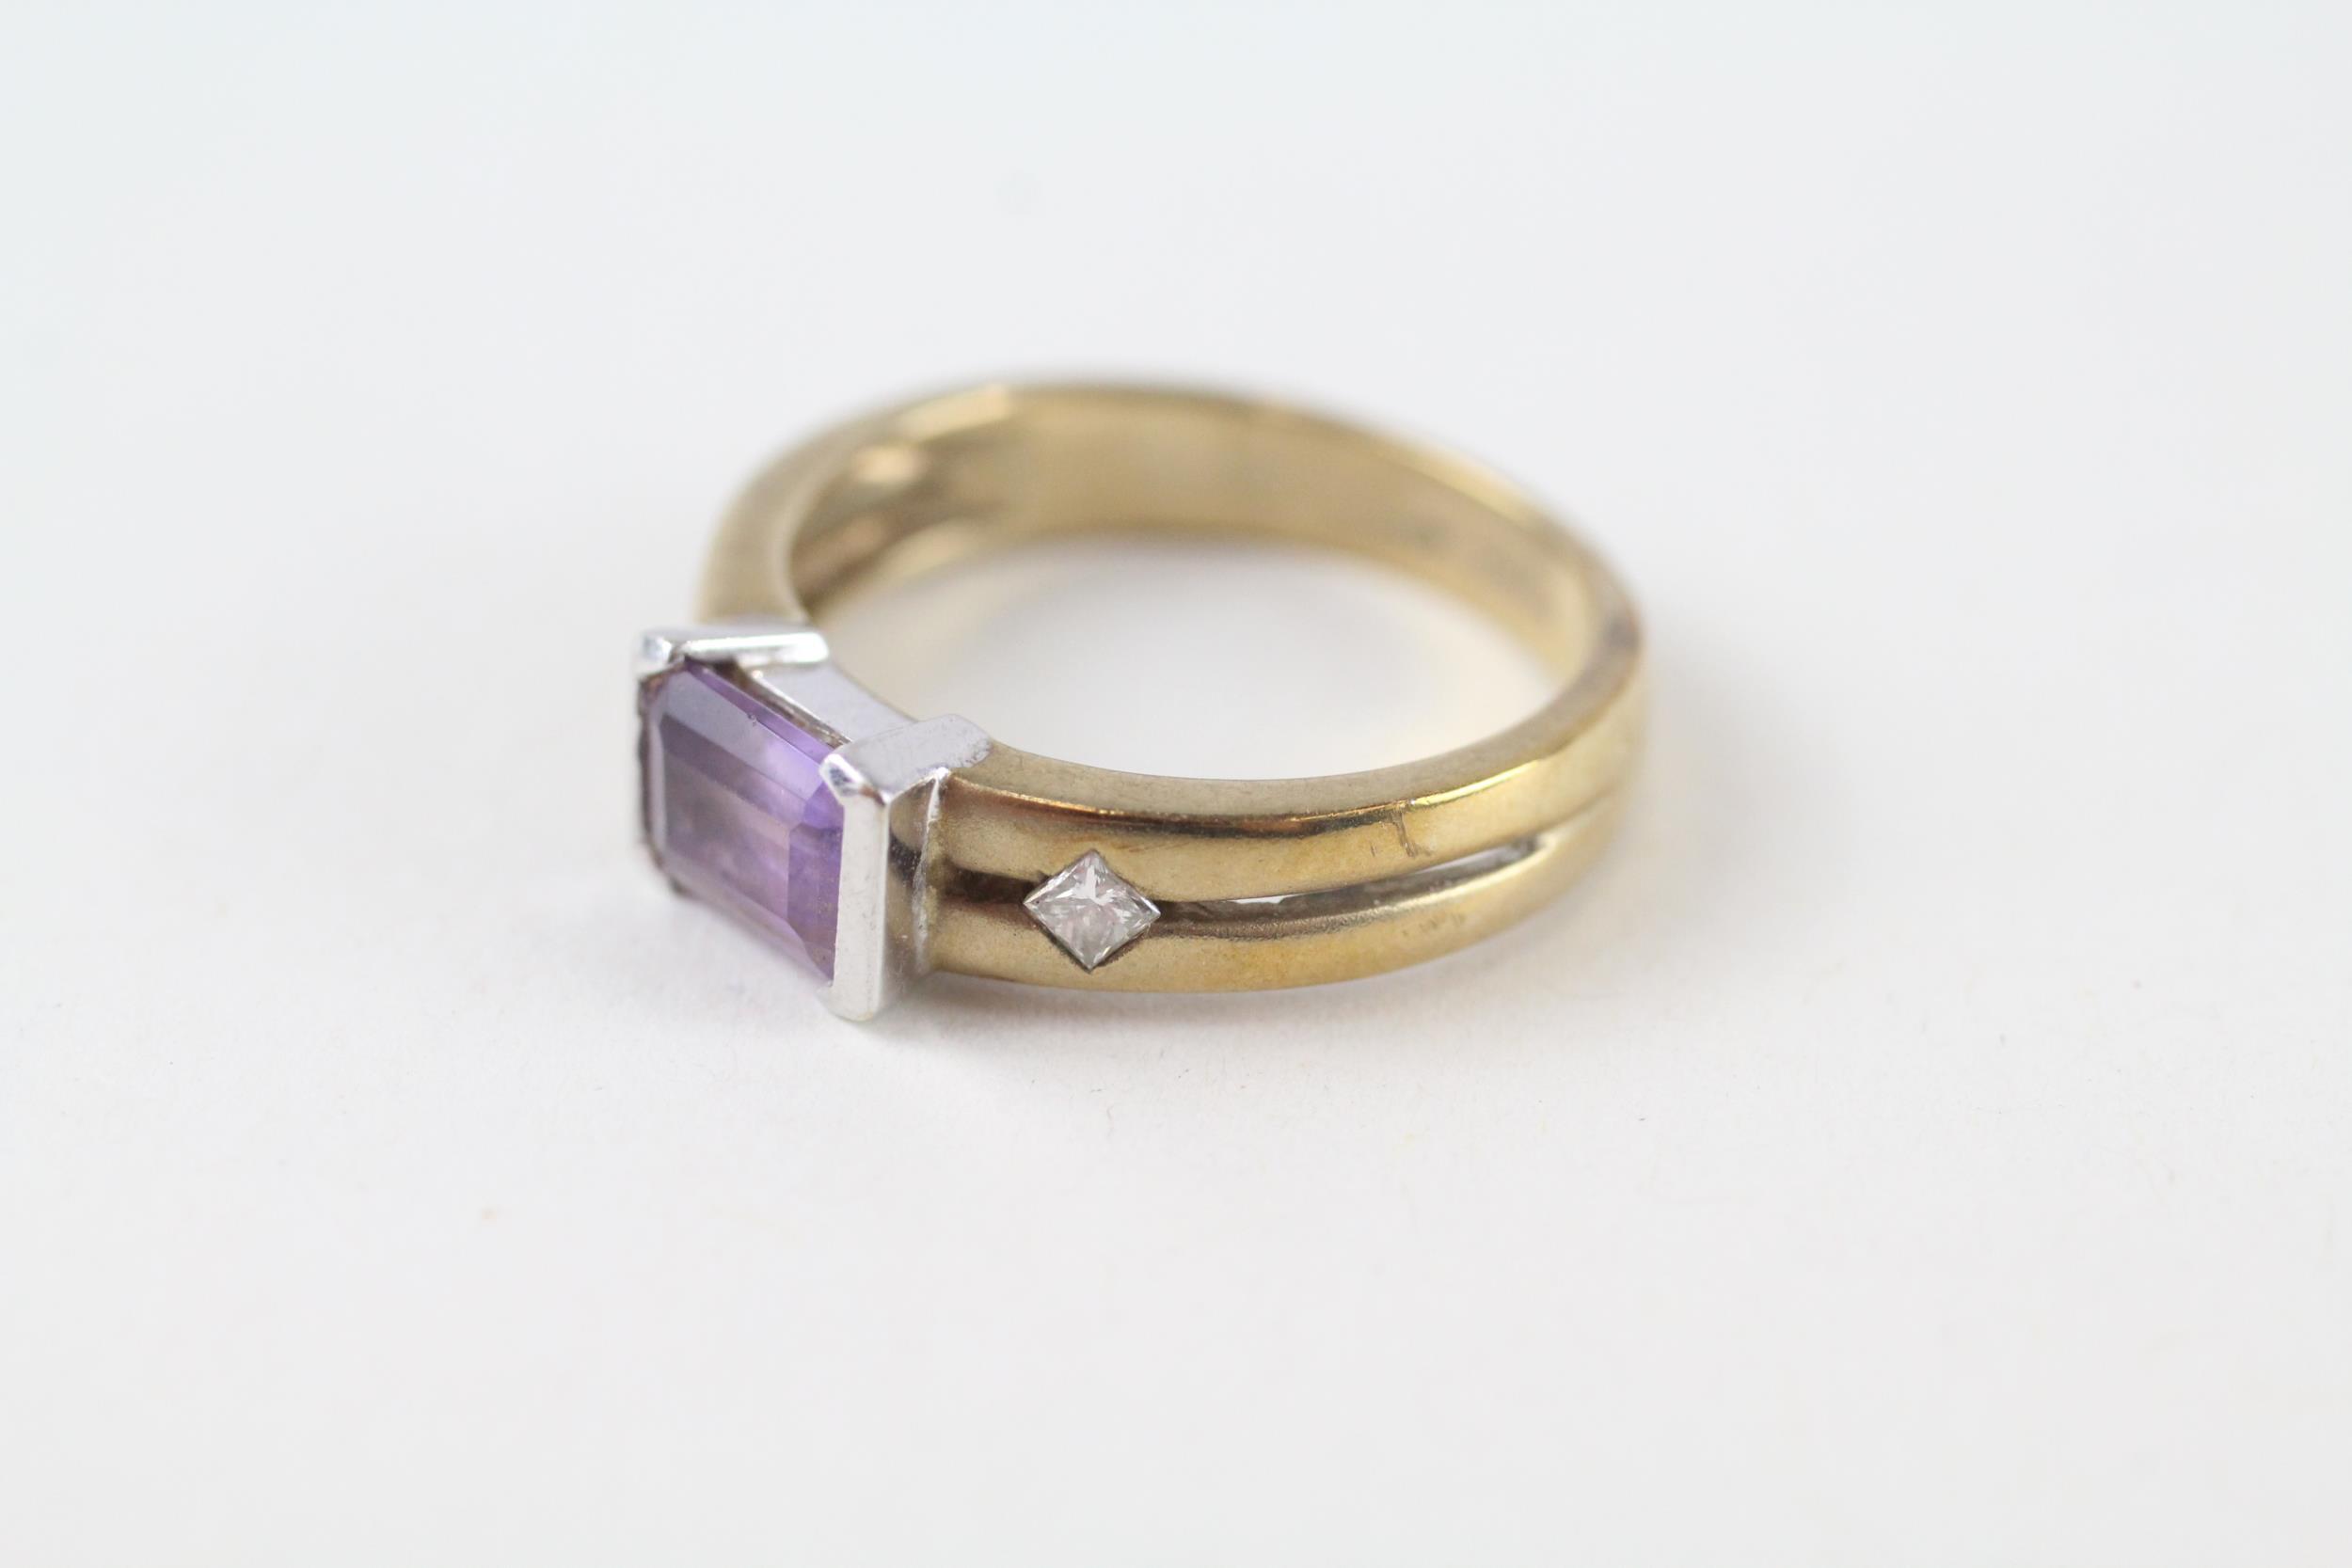 9ct gold emerald cut amethyst single stone ring with diamond sides (3.4g) Size N - Image 3 of 4